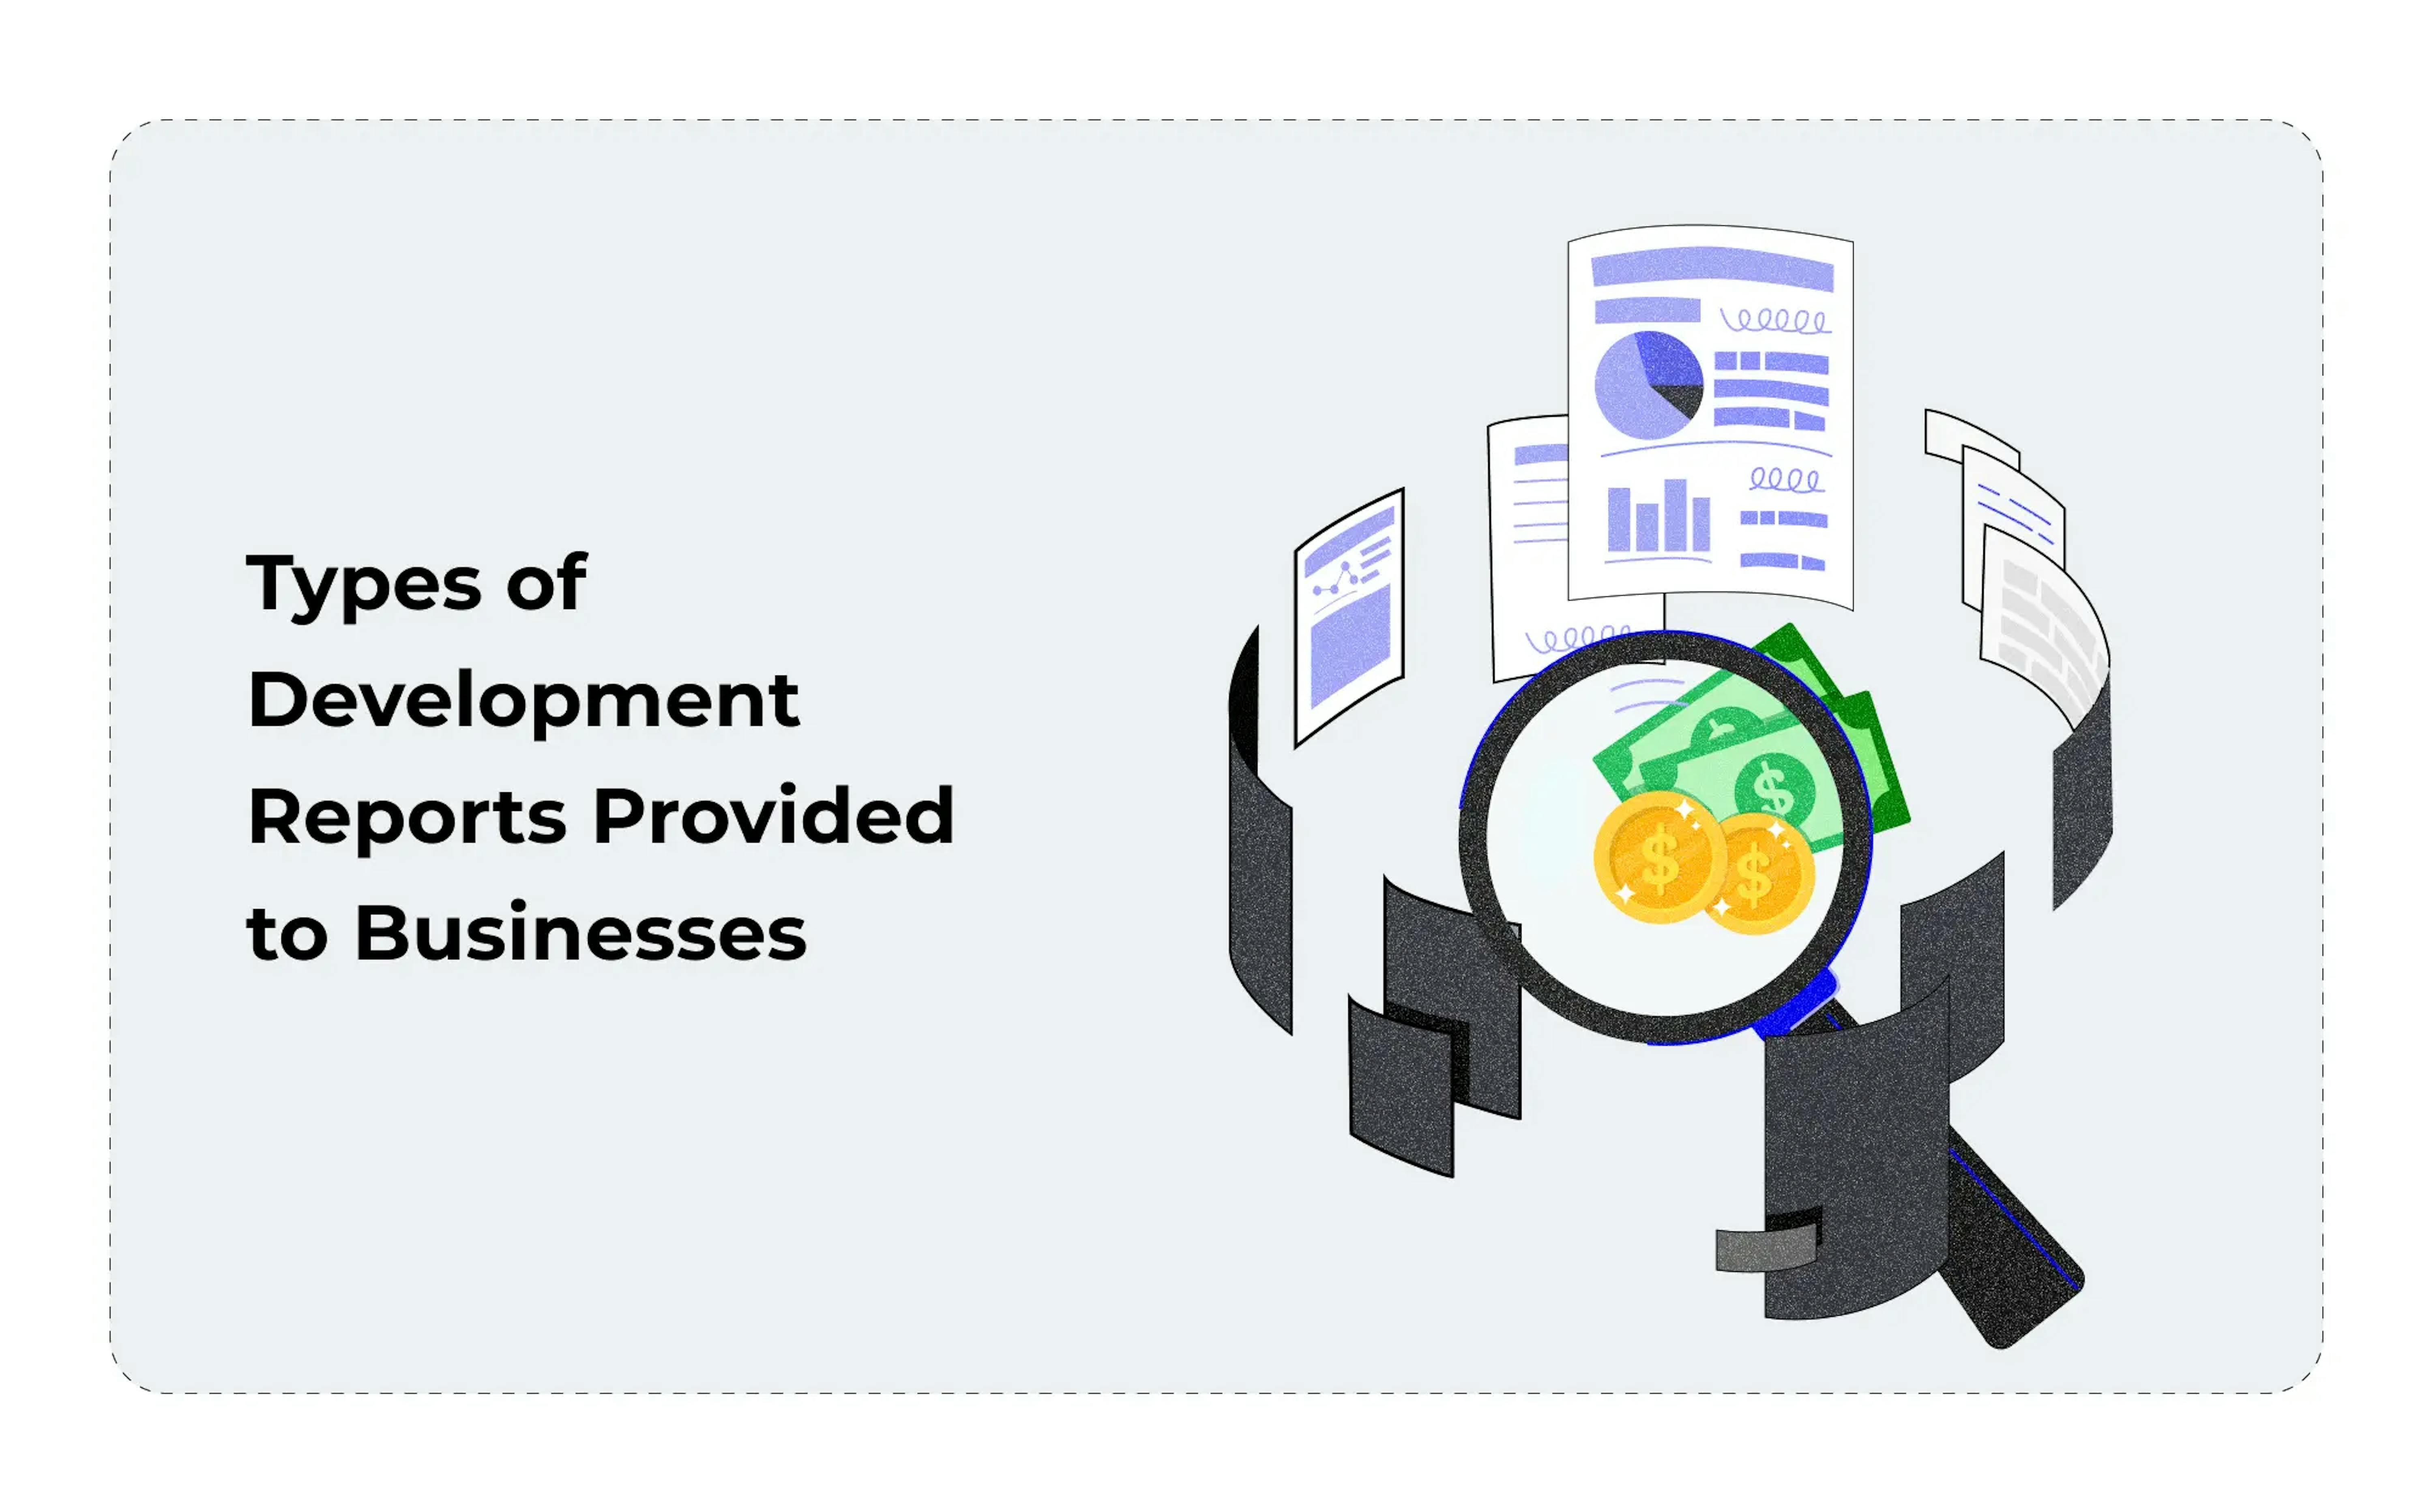 Types of Development Reports Provided to Businesses